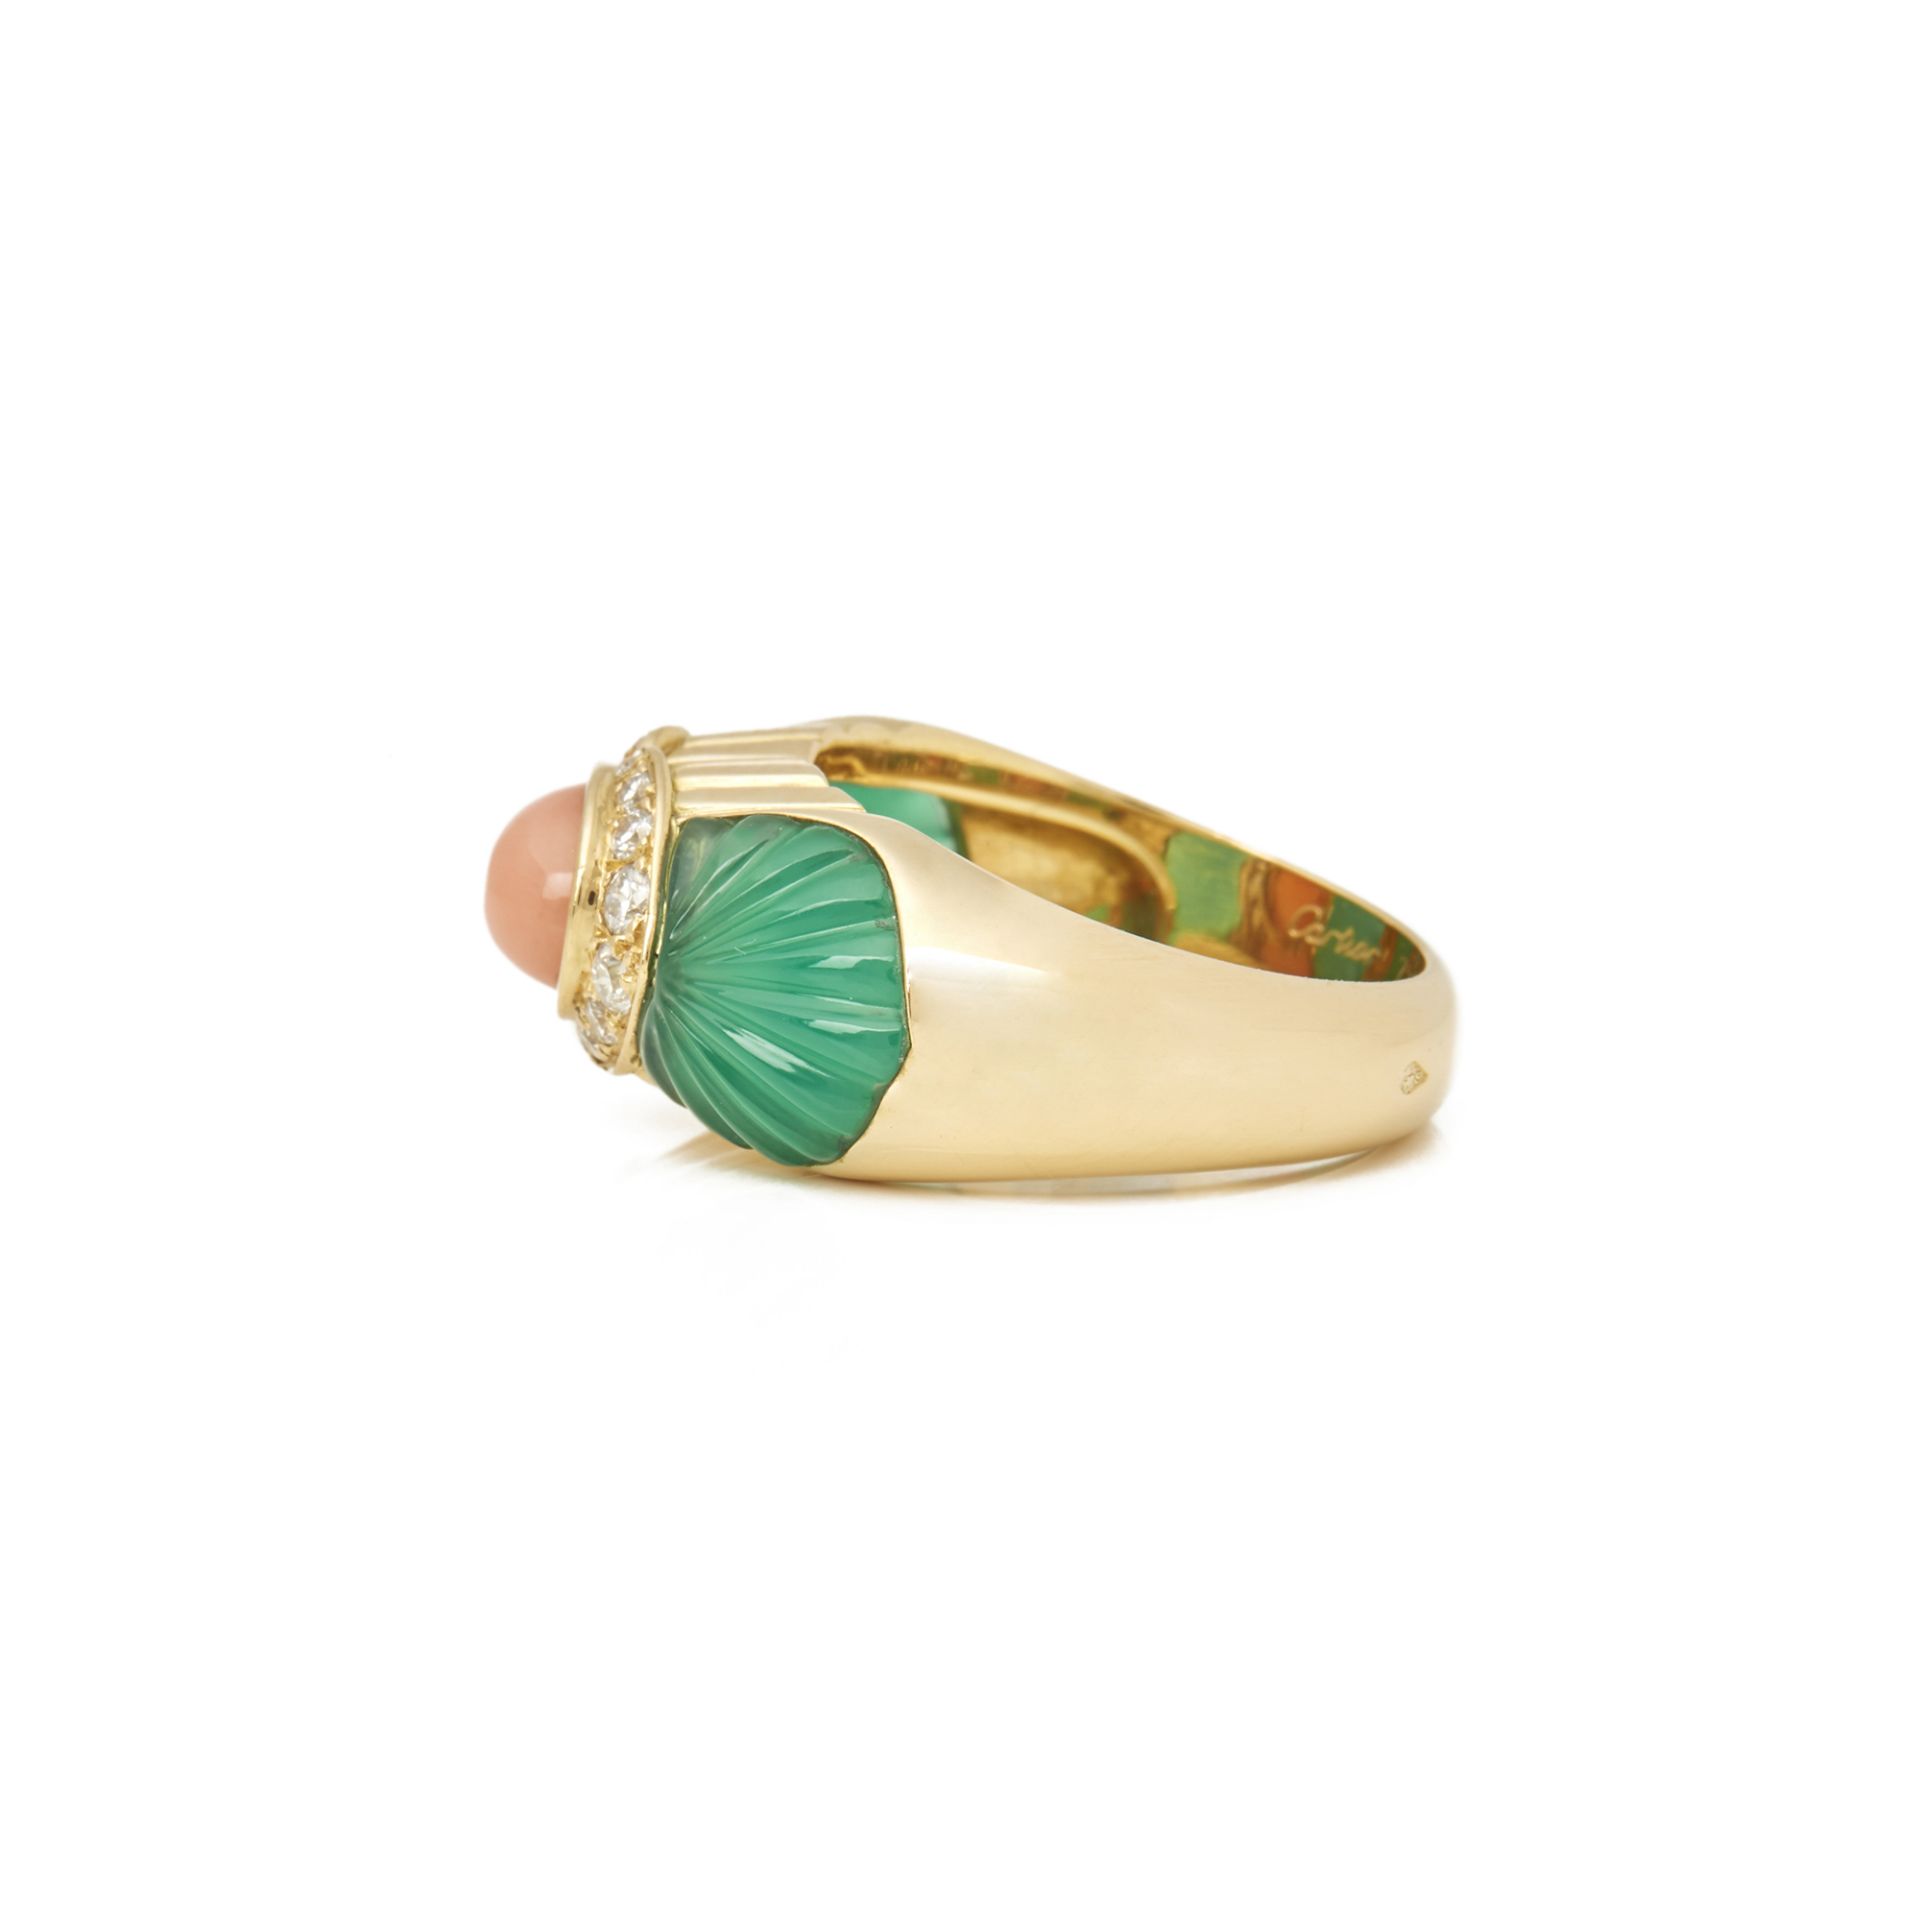 Cartier 18k Yellow Gold Chrysoprase, Coral & Diamond Ring - Image 5 of 7